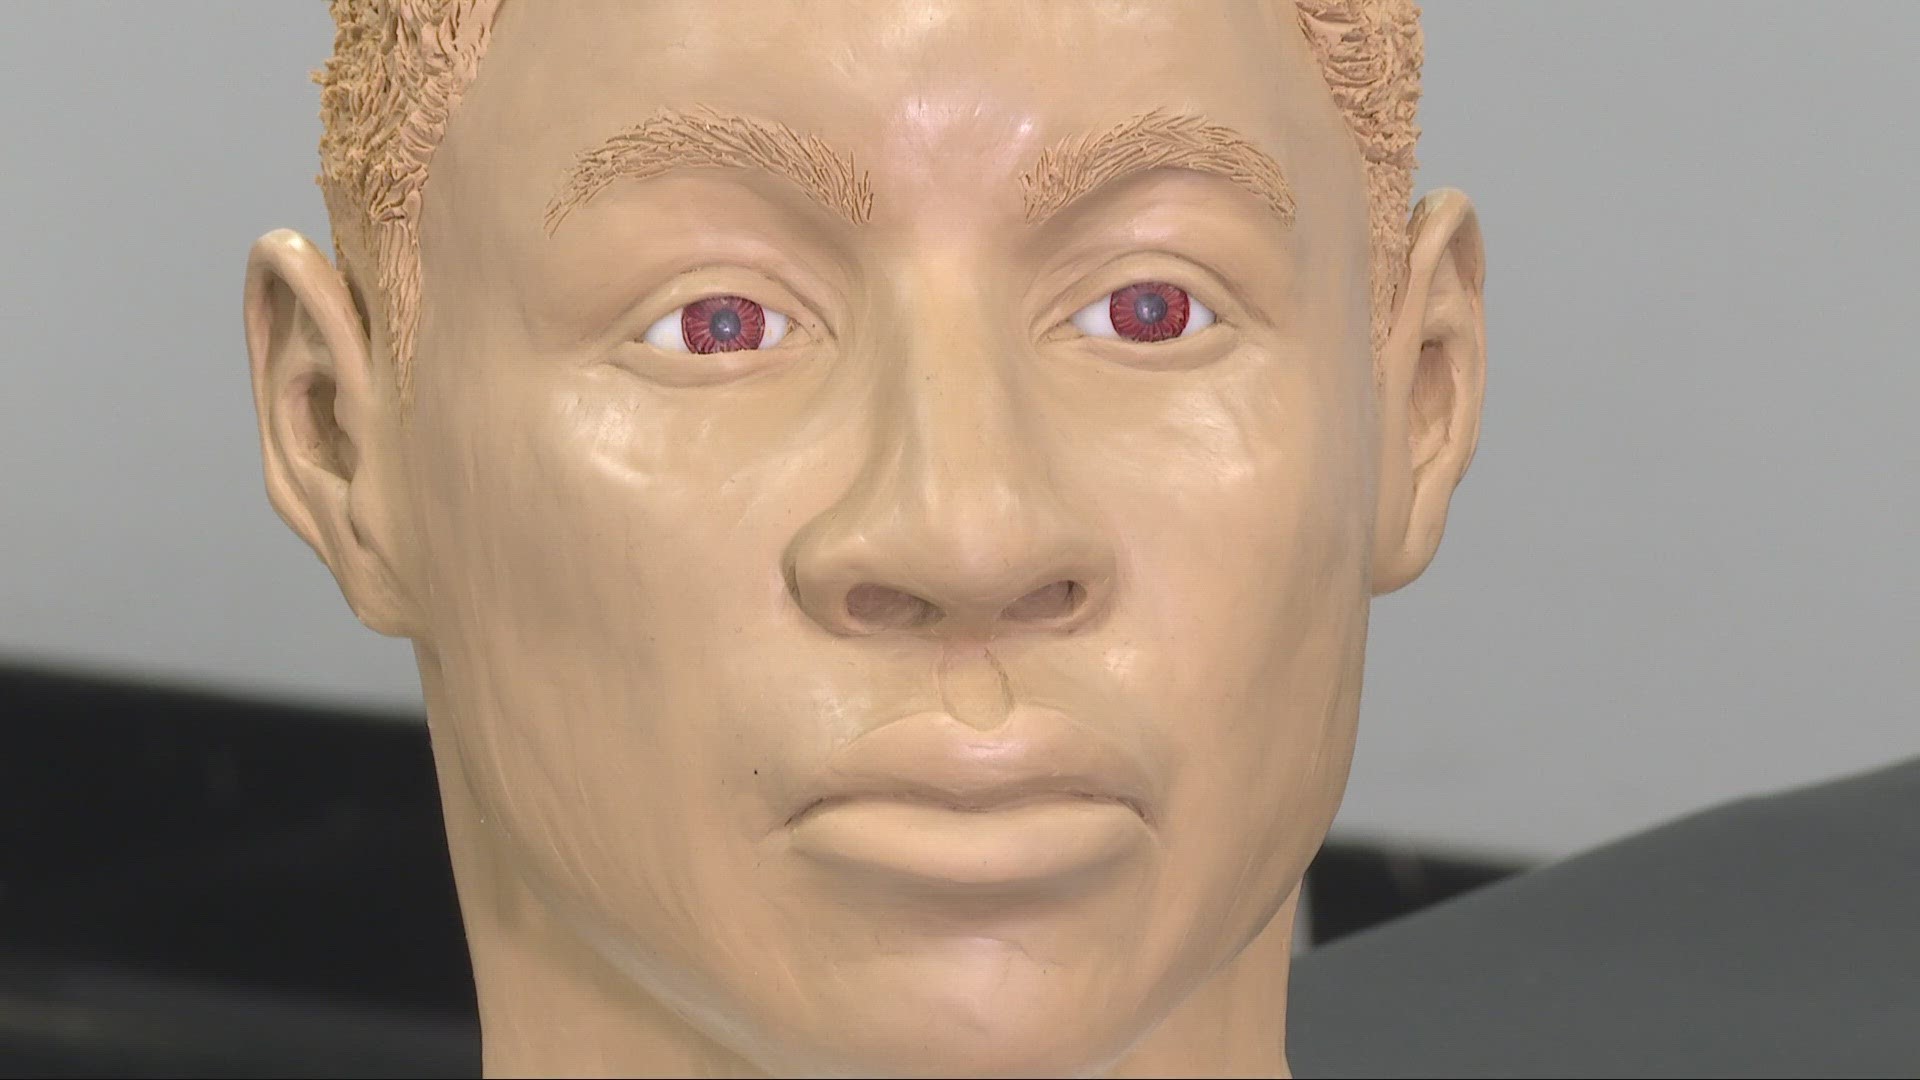 Forensic facial reconstruction for Canton John Doe case from 2001 wkyc image pic